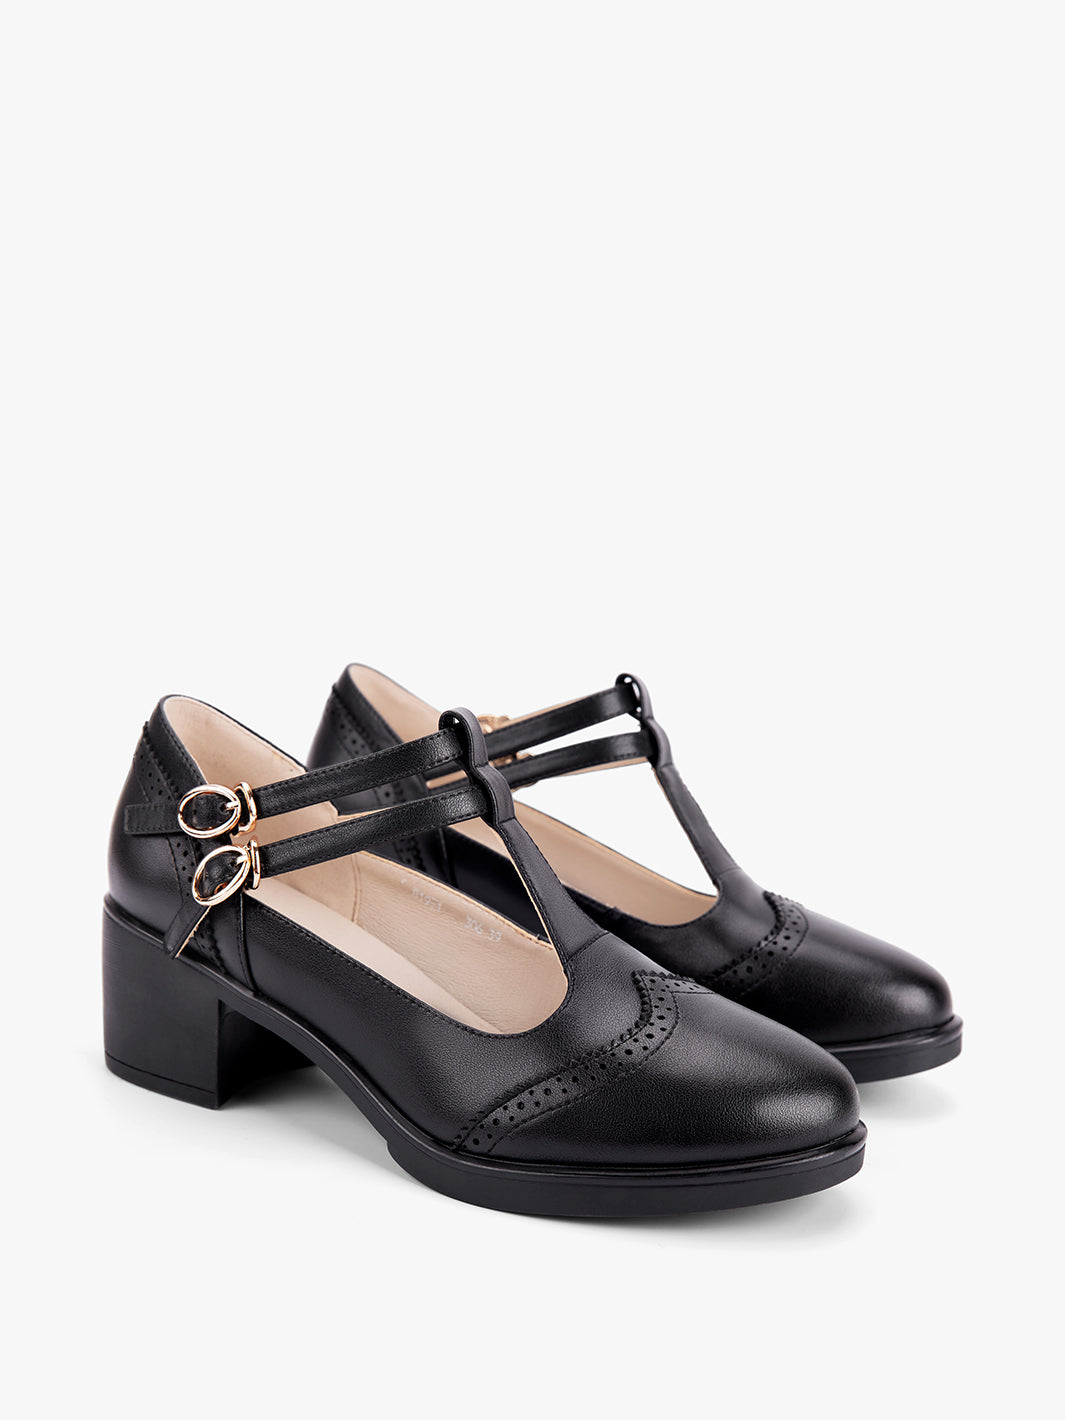 Ecosusi - Vintage Bow Leather Shoes, Women's Fashion, Footwear